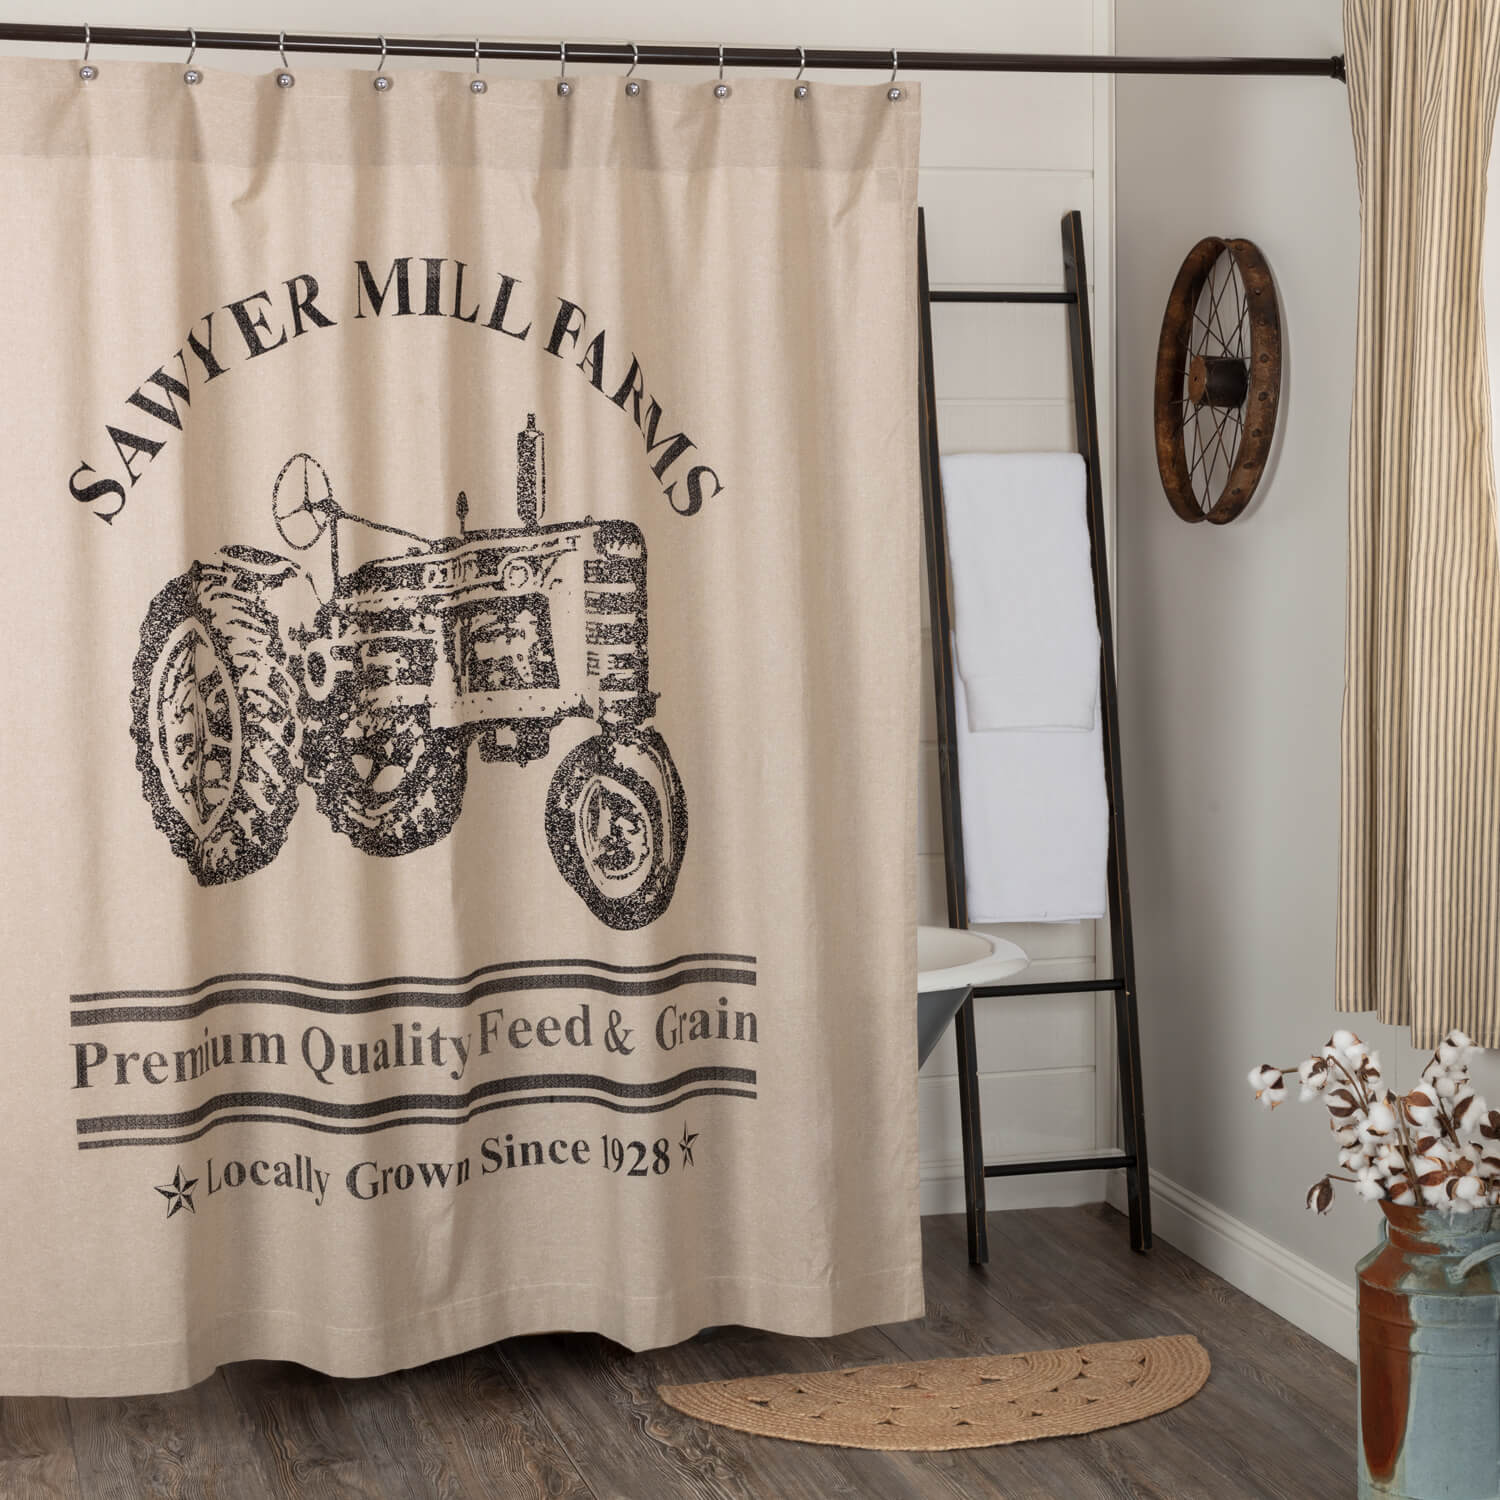 Sawyer Mill Charcoal Tractor Shower Curtain 72x72:Bedding and Bath ...